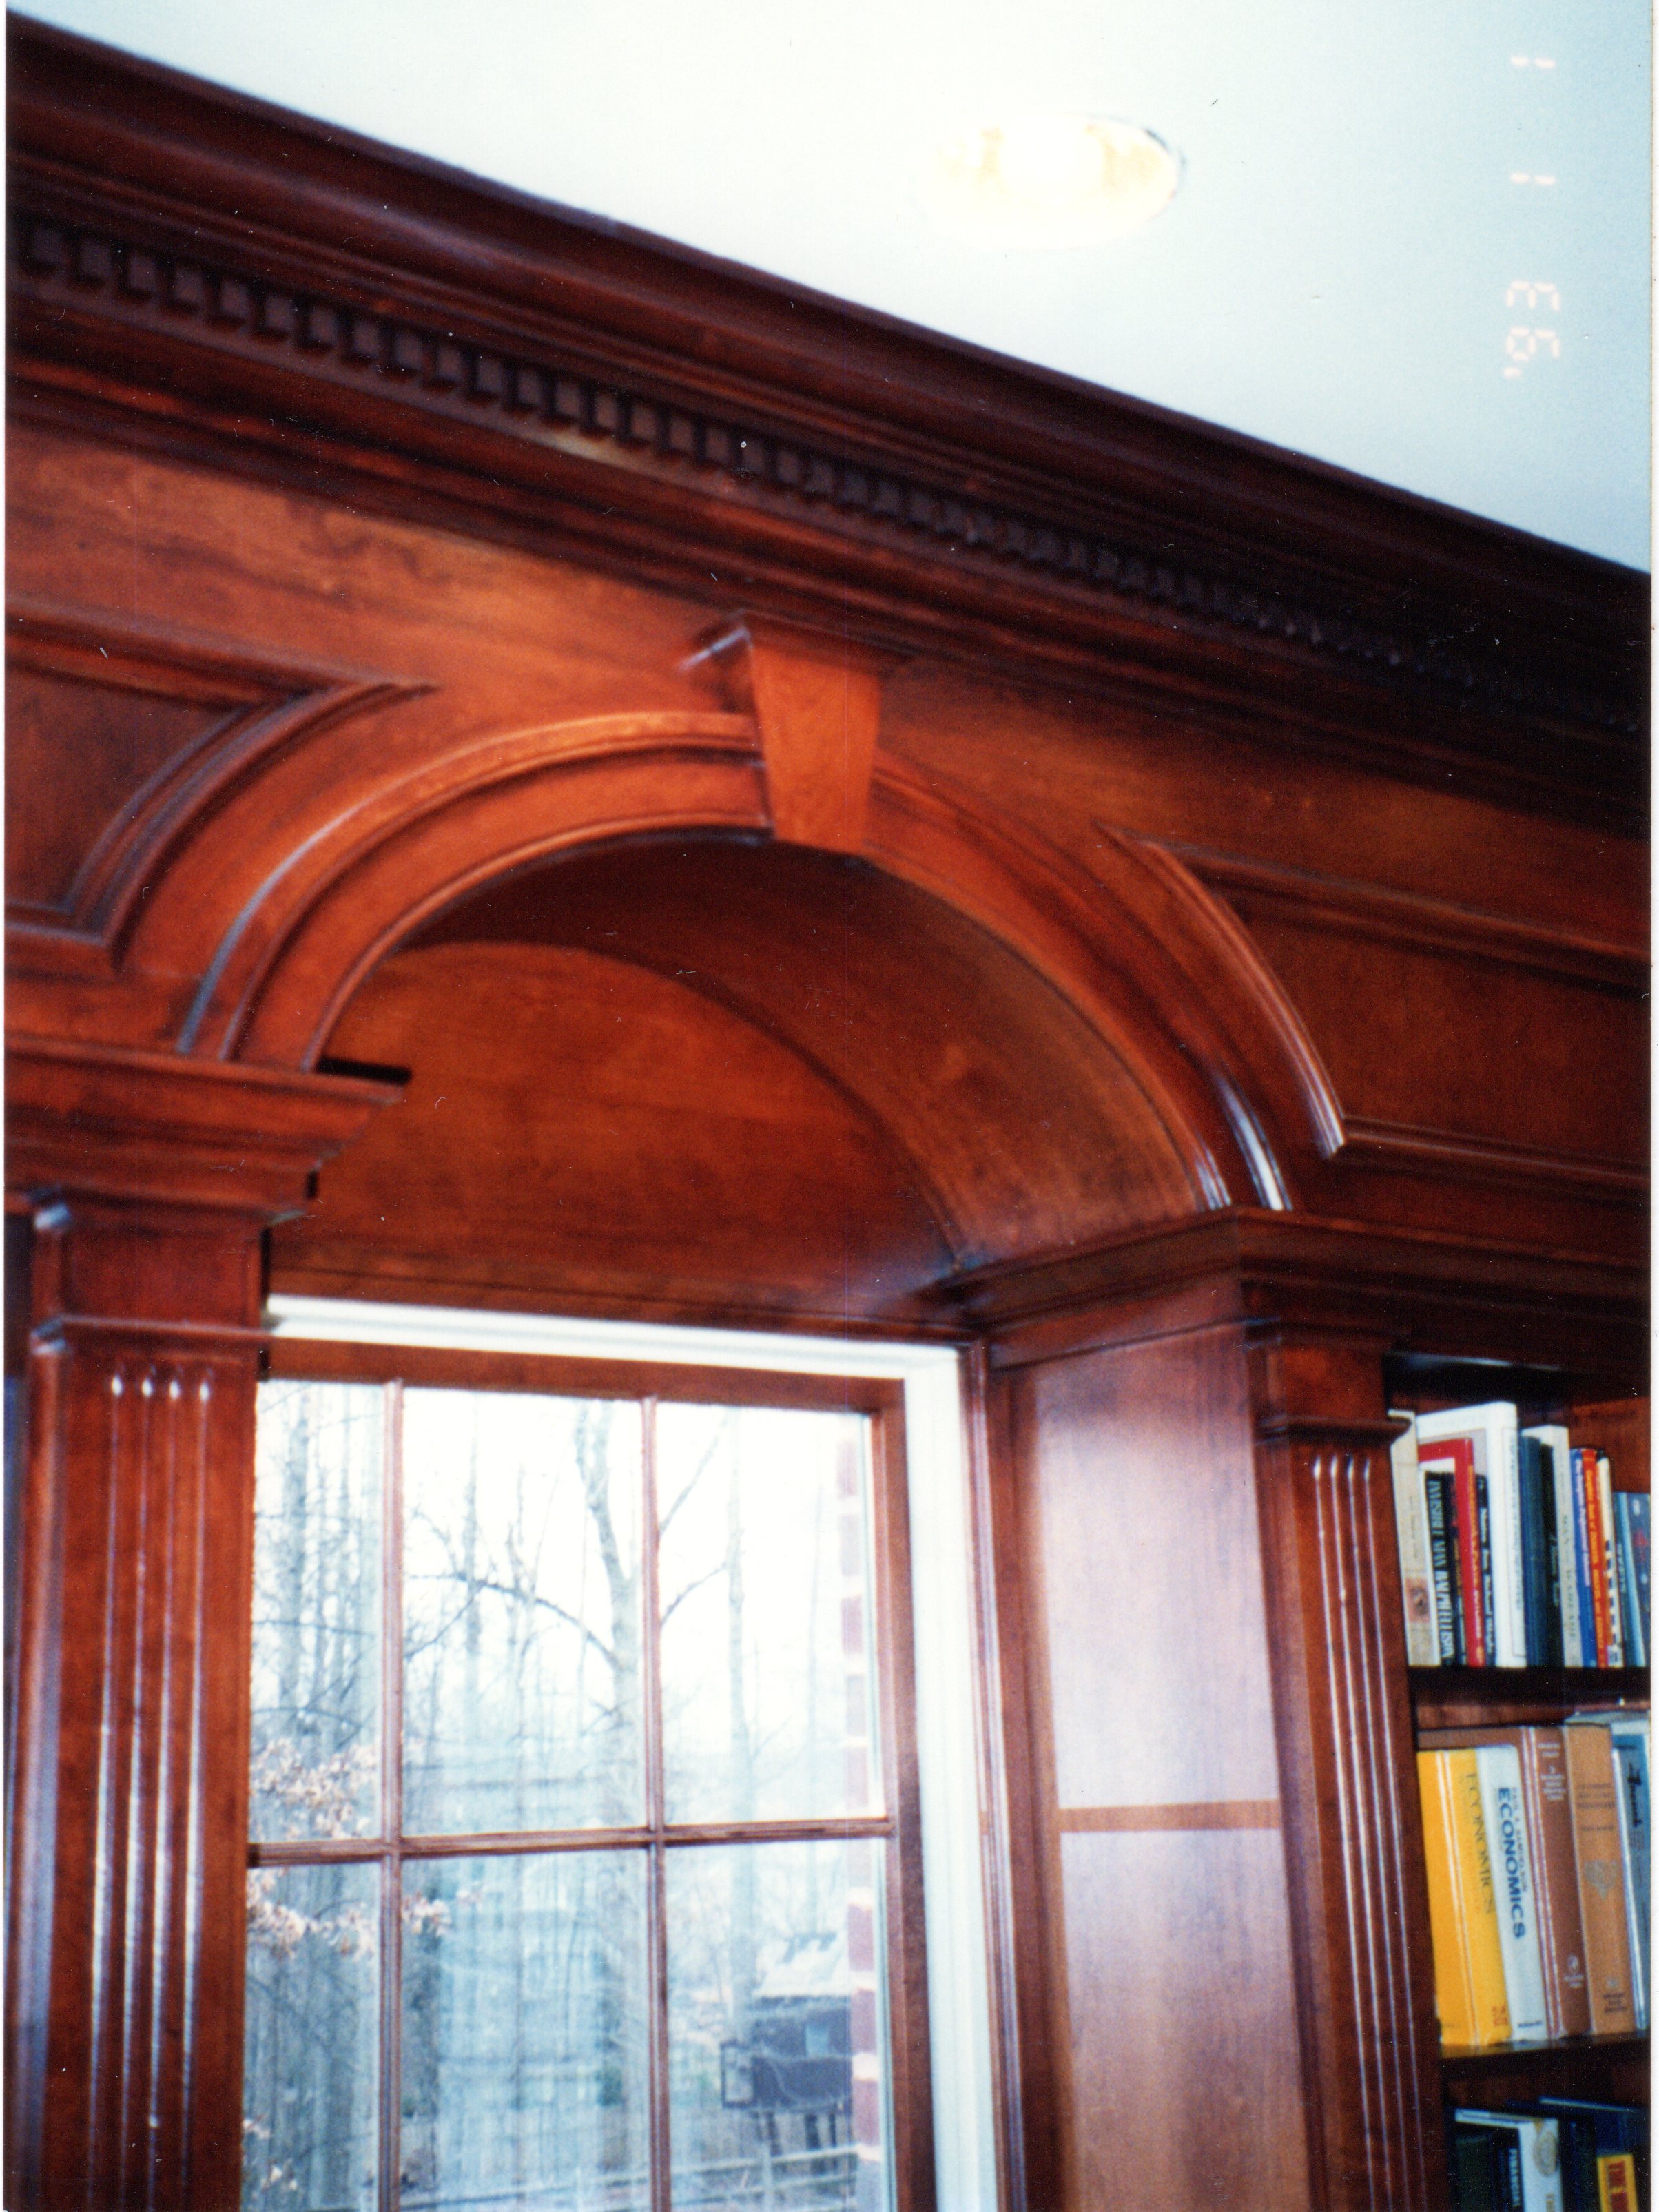 Arched Window at Library